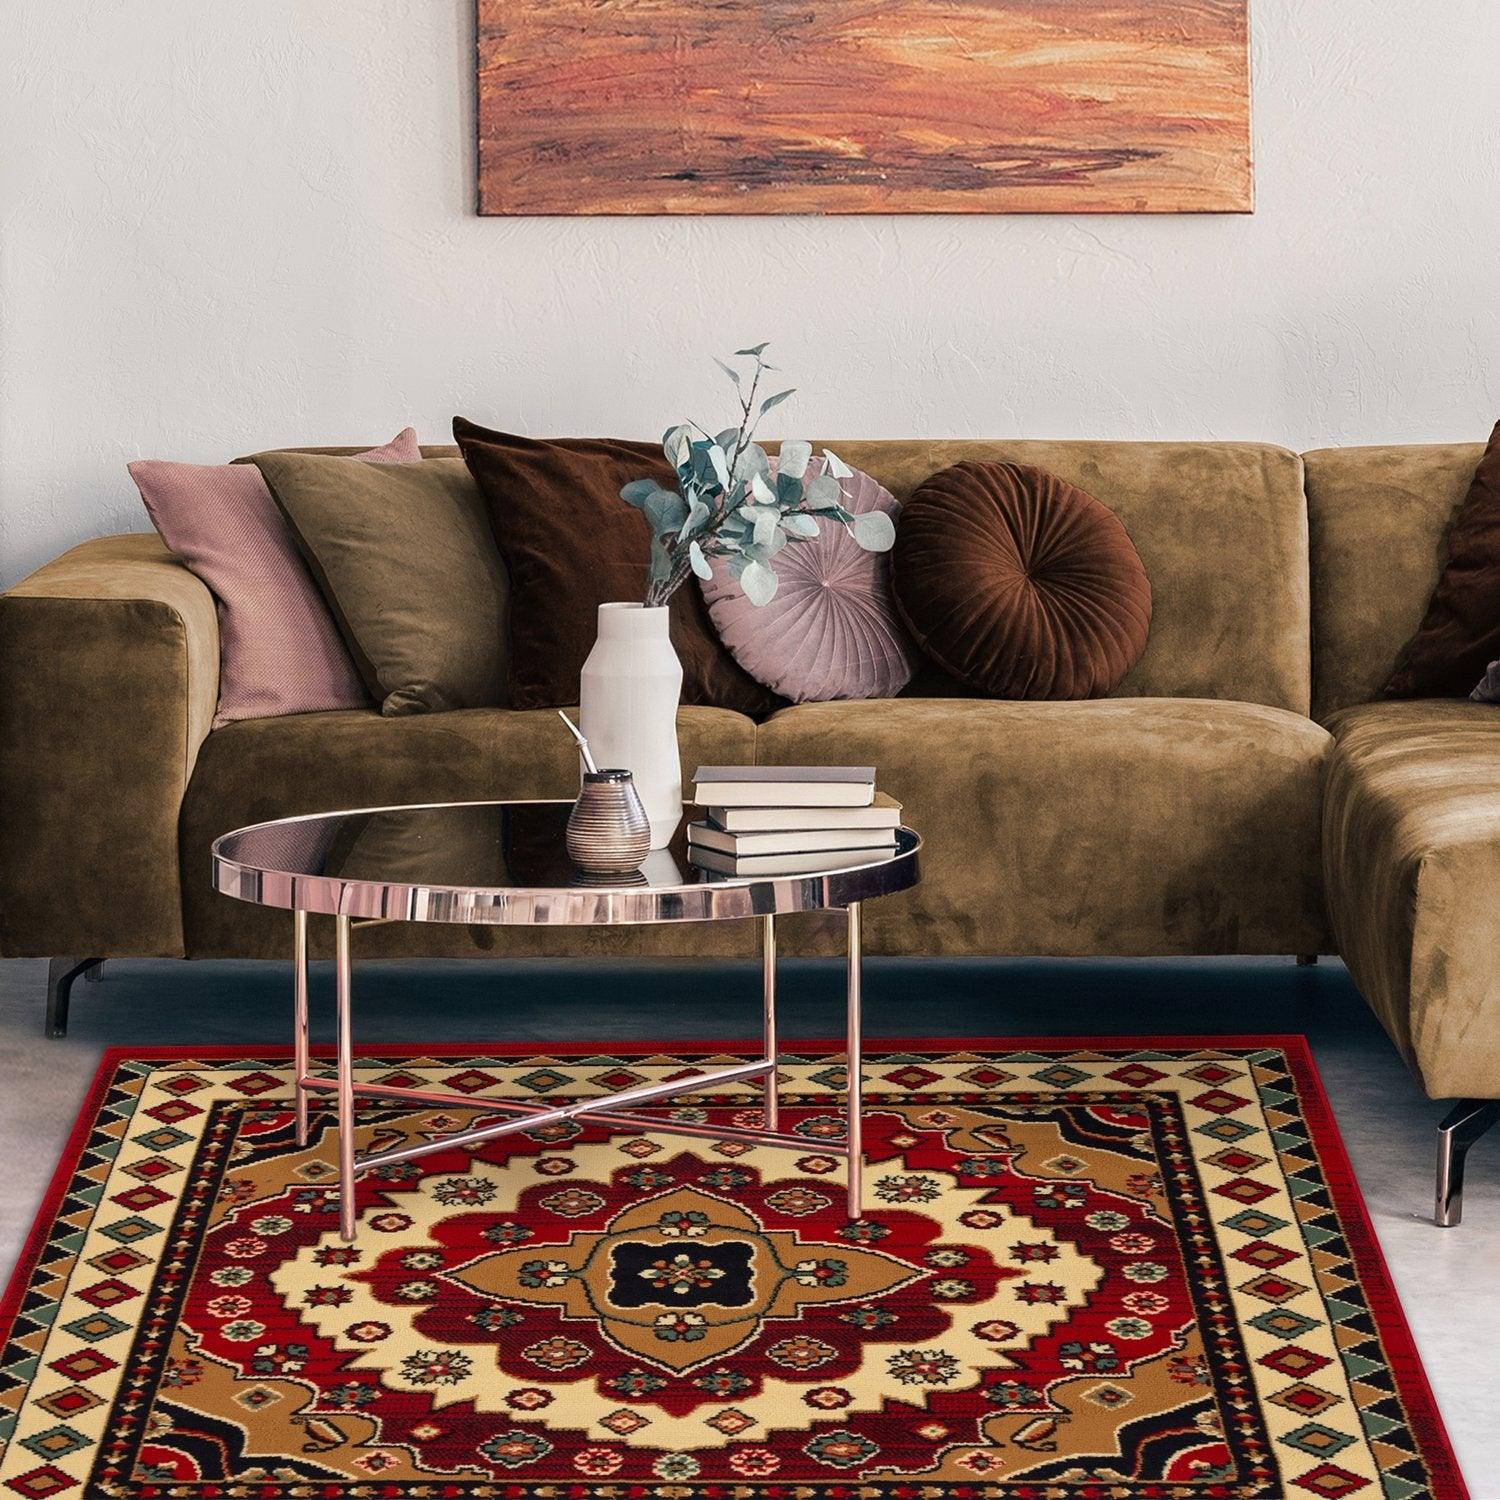 How To Clean A Fine Area Rug - Home City Inc